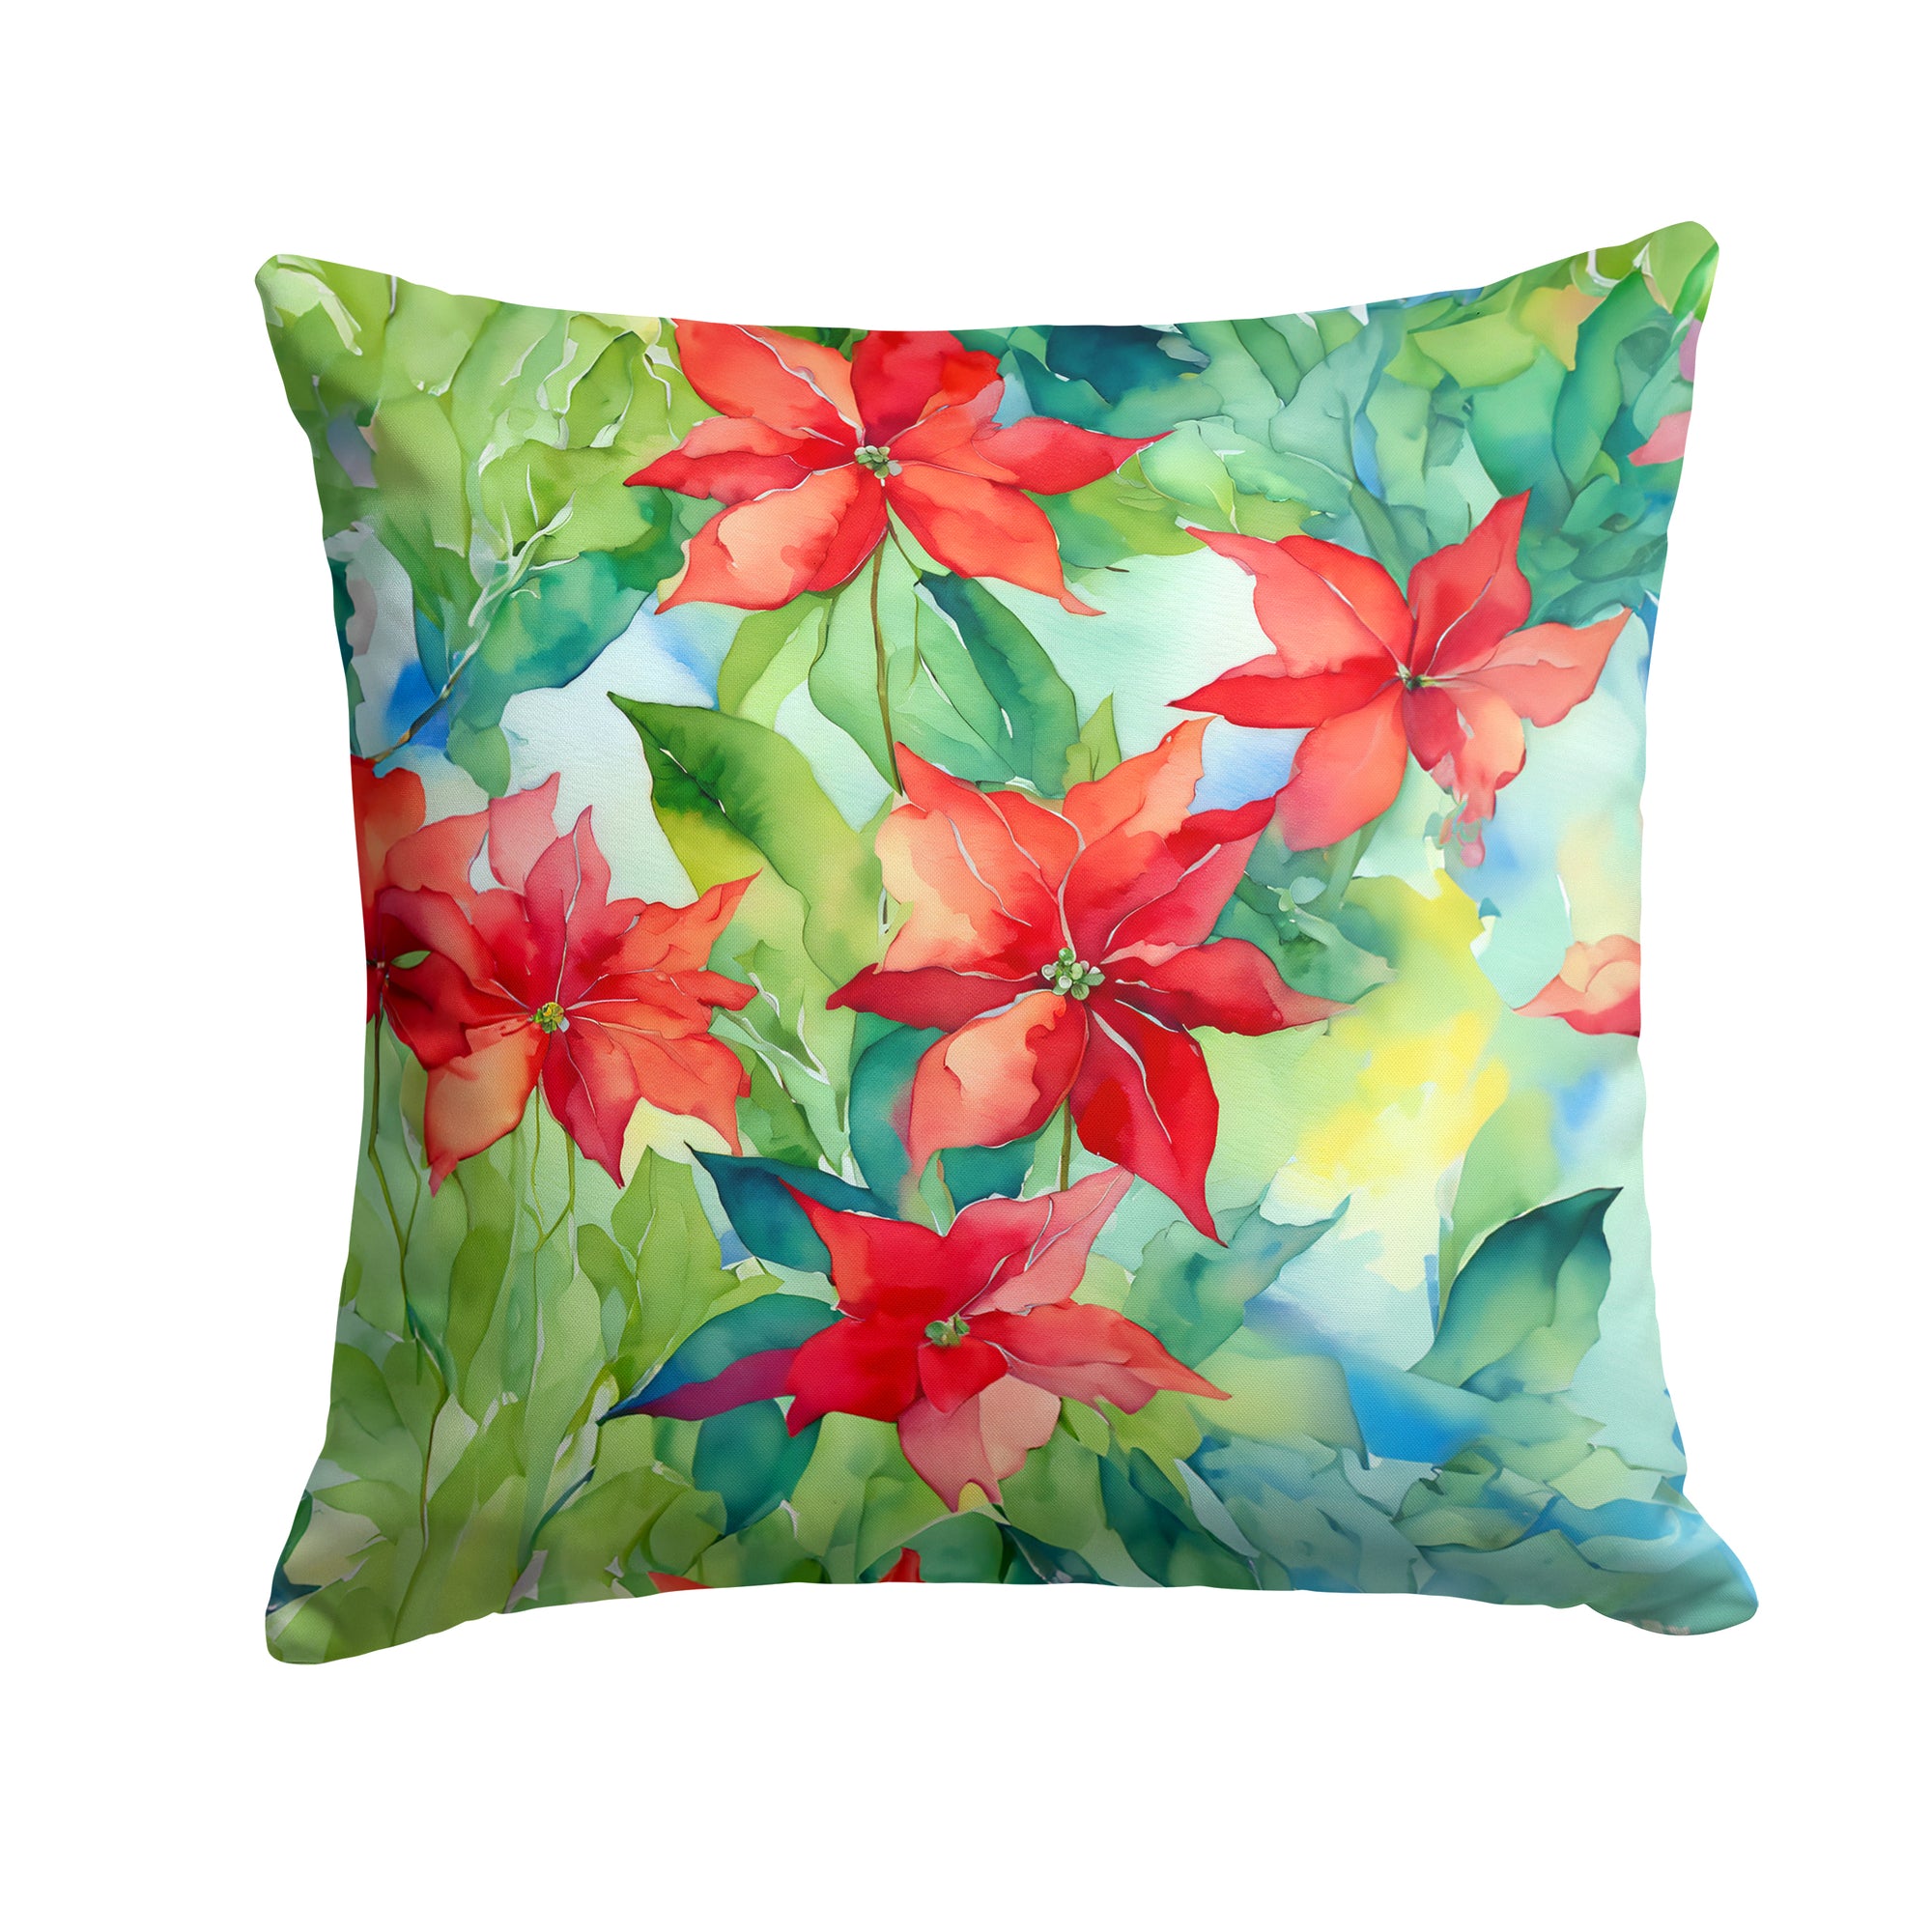 Buy this Poinsettias in Watercolor Throw Pillow